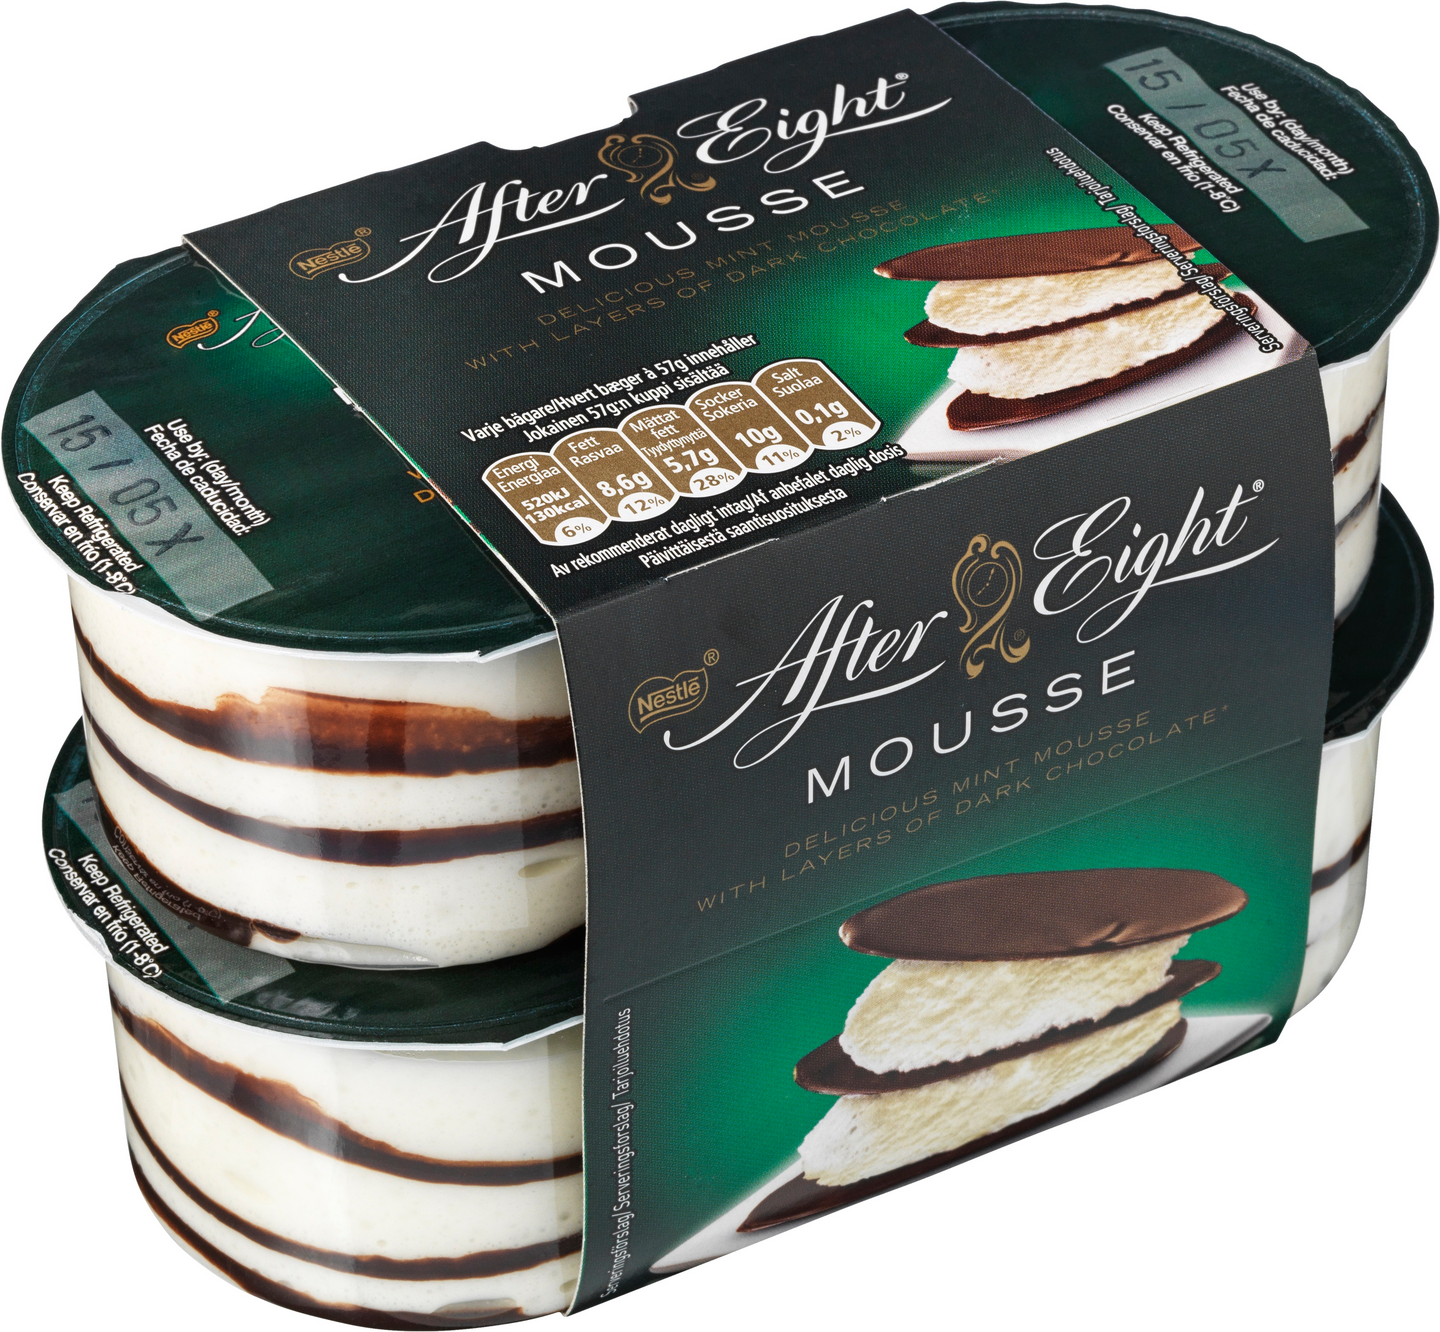 Nestle After Eight mousse 4x57g